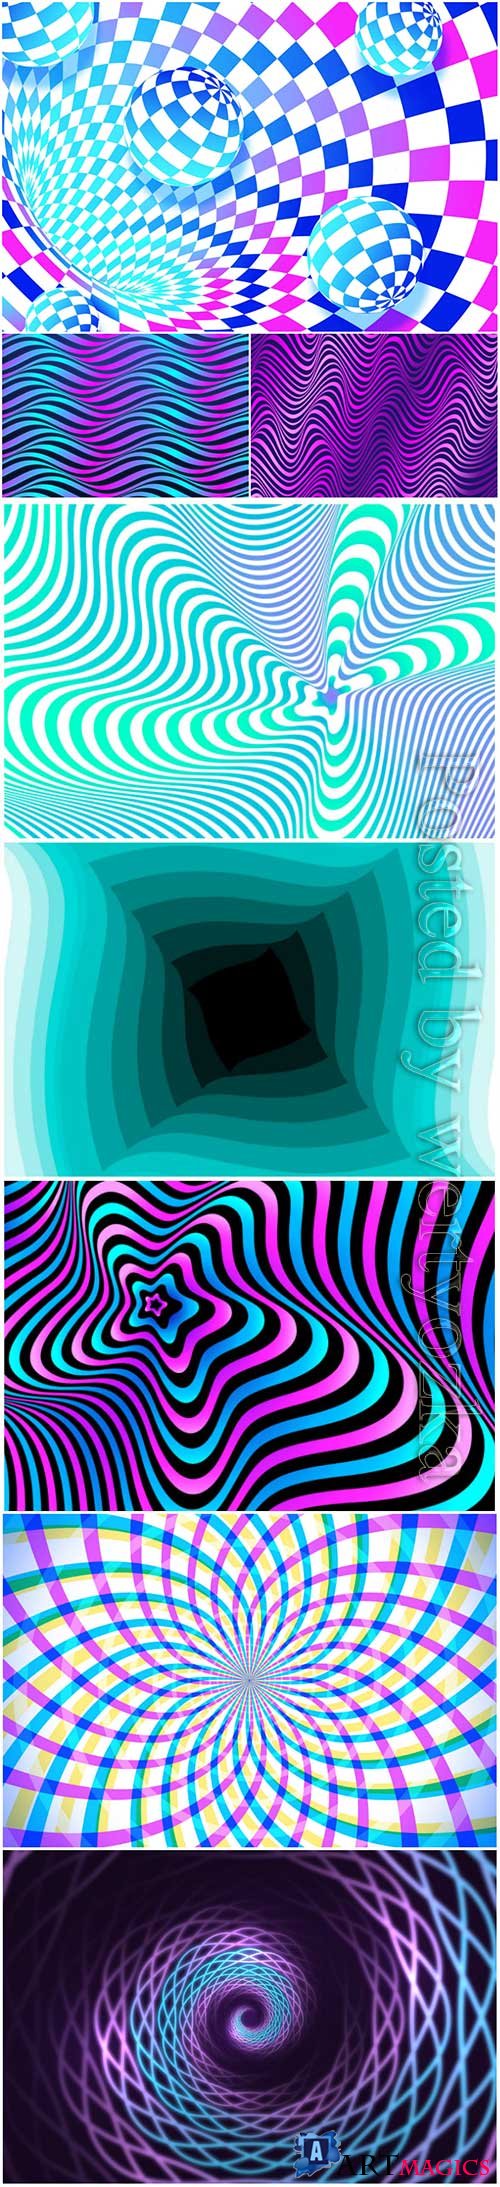 Psychedelic optical illusion vector background # 8